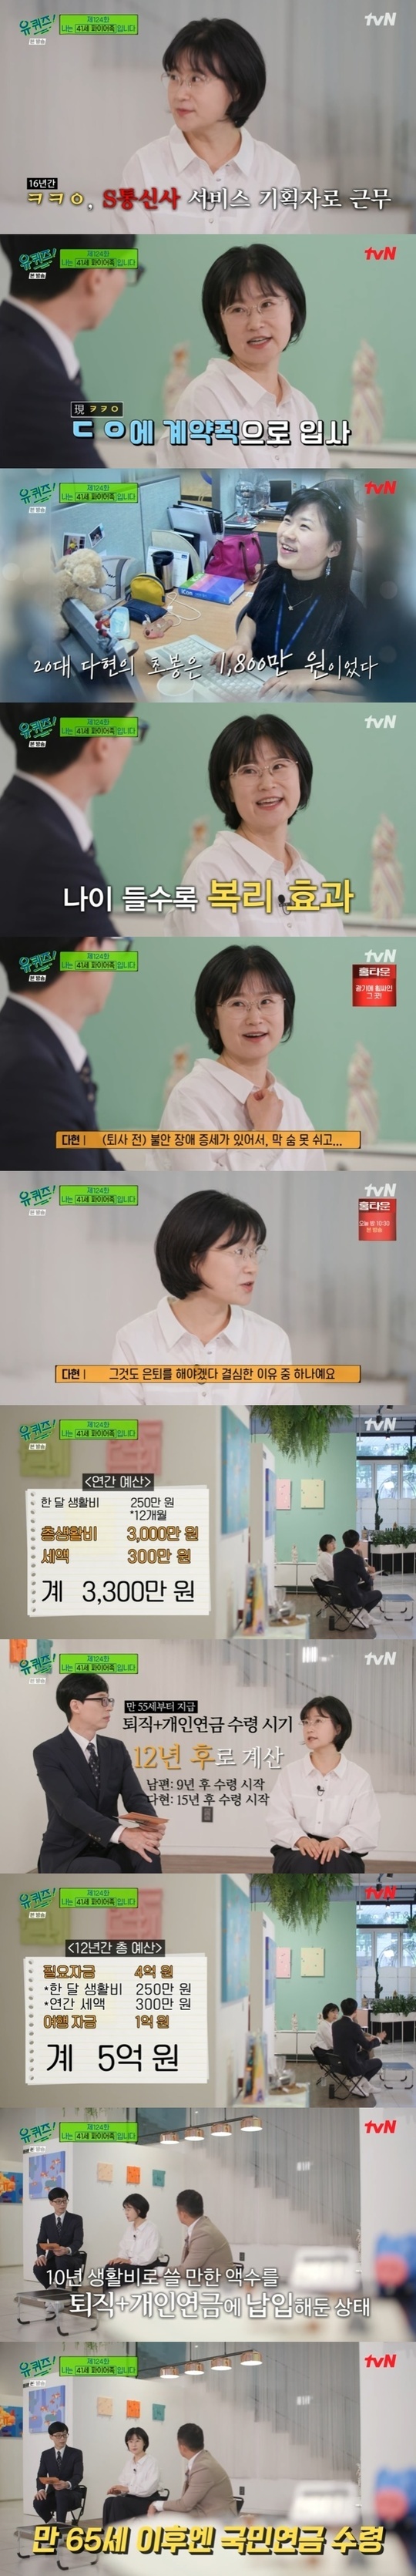 Kim Dahyun, who retired early at the age of 41, started with an annual salary of 18 million won and collected 500 million won to tell the daily life of the Fire people who are now spending their own time.In the 124th episode of tvN entertainment You Quiz on the Block (hereinafter referred to as Yu Quiz), which was broadcast on September 29, the guests who are building their own special experiences and history appeared as guests.On this day, Fireman Kim Dahyun, who is realizing romance after retiring from A Year Ago in Winter, 40, appeared as a self.The Fires are people who want to retire at a rapid pace through economic independence, and are in a big issue recently.Mr. Dahyun said he has retired with A Year Ago in Winter Husband and has been a white-collar for a year. He said he planned to retire from the age of 35.Mr. Dahyun, who worked as a team leader in the IT industry service planning until his retirement, asked if the Fire could be able to attend large companies. I started my first job as a contract worker in 2004.At that time, the salary was only 18 million won. However, I am working much harder than I want to do in the company because my work is fun, so I became a full-time employee and my salary once rose.After that, I moved to SK and my salary went up, but I was told to come back (from the next Kakao) and then my salary was cut once, he said.I am grateful for calling me and I have been working hard and have been well evaluated and have earned my salary, said Dahyun. Wages may be small when I am a young age, but if I get older, it is a welfare effect, I can do it (if I can do it).It is not only possible because his retirement is a big company.Mr. Dahyun spent 600,000 won on taxi fares while working at a company in the past, and he told the daily life of the worker who had been working for a day when he left work.I had anxiety disorder before leaving the company, so I could not breathe and my heart was beating quickly, so my health was bad, said Dahyun, who said that this was the point where I started to worry about retirement directly.Also, being put into the emergency room due to stressful enteritis was a decisive opportunity.Mr. Dahyun also revealed his own calculation method to prepare for retirement funds: 3 million won in taxes added to the calculation that he needs 2.5 million won a month, and 33 million won in money needed a year.Husband calculated that the living expenses would be 400 million for 12 years until the age of 55, when he was under pension, plus 100 million for travel, making a total of 500 million a target fund for retirement.Kim Dahyun also prepared an additional pension for 10 years until the national pension came out, and later planned a housing pension.Mr. Dahyun said, When I was in the company and after leaving the company, I bought a lot of stress relief when I was stressed.I saw that the money was more than I thought, he said. There is one mature Hanwoo house in Pangyo, which is expensive per person.I went to Husband often because I wanted to go to eat meat every time I was tired, but now I do not think I can eat Hanwoo.(But) the most different thing about retirement was that I could not buy anything to comfort me, so I could reduce the cost. 